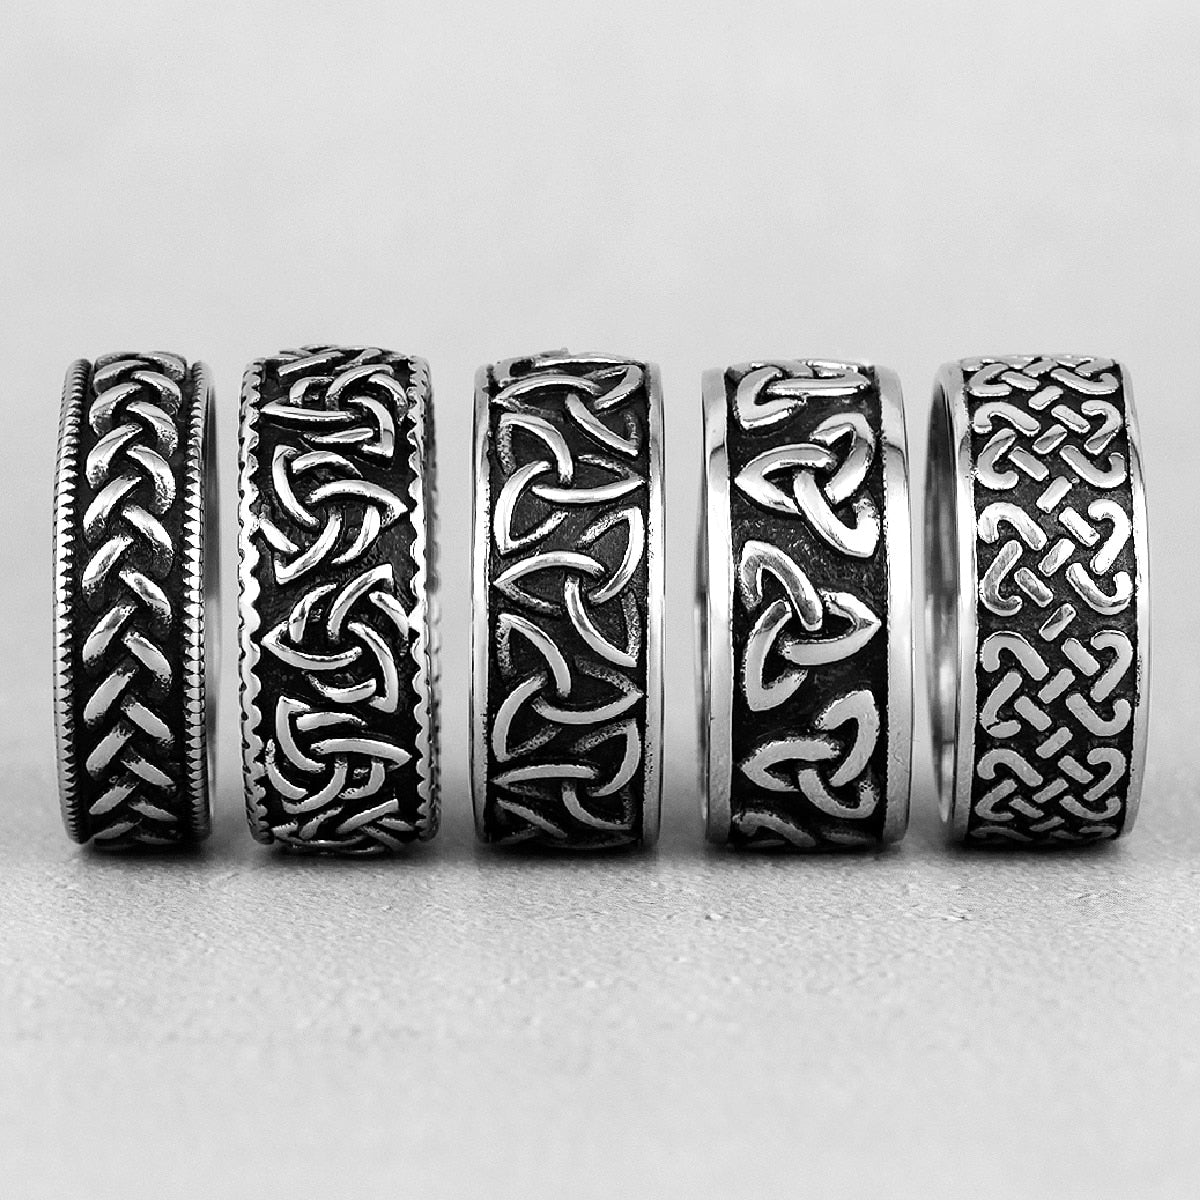 Celtic Knot Stainless Steel Rings - 5 styles